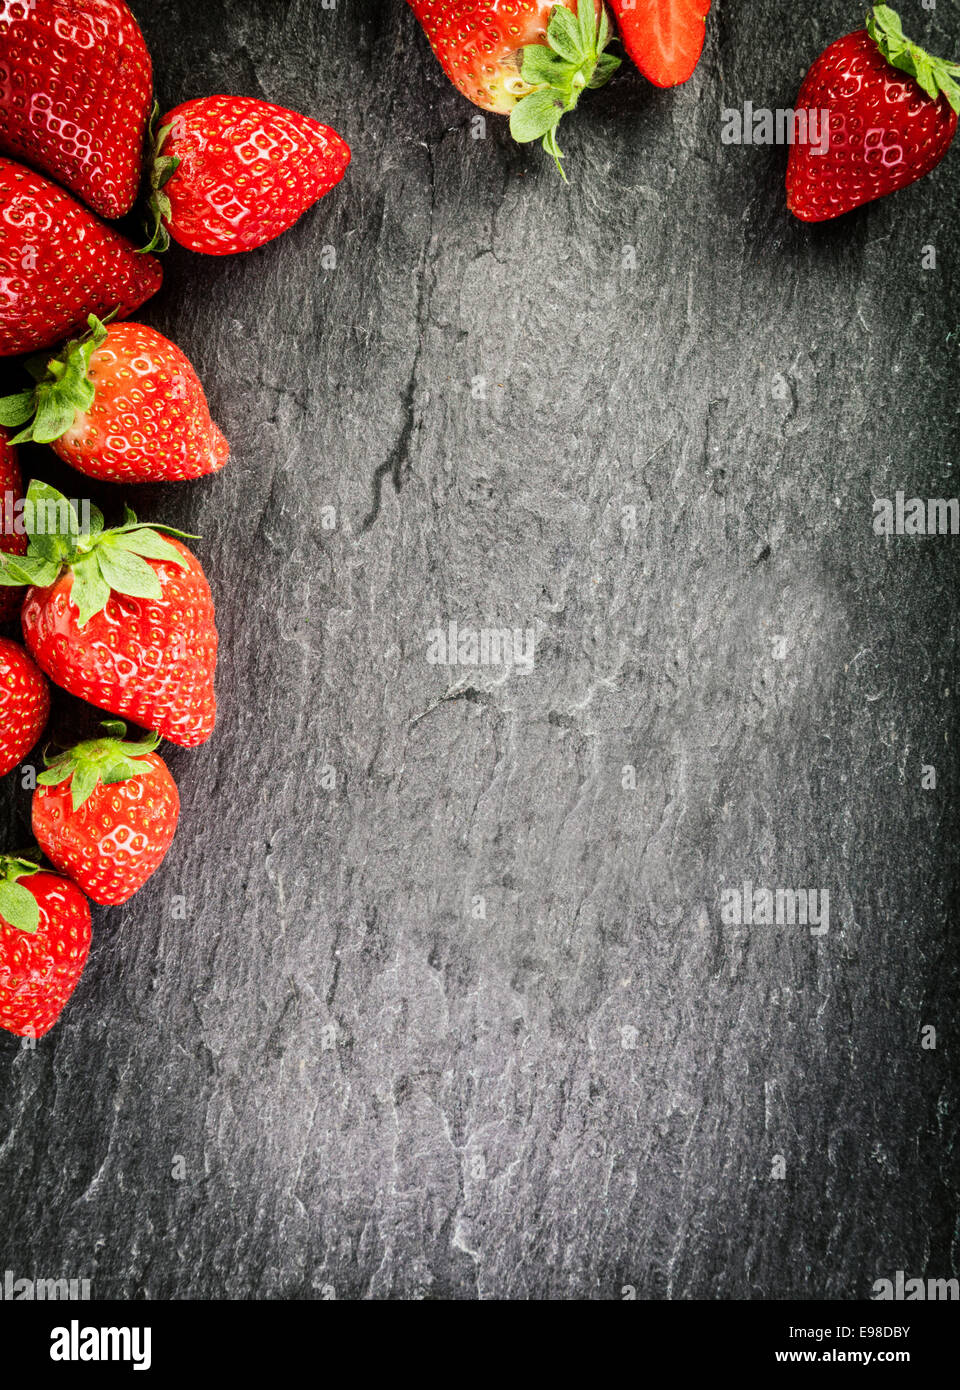 Border of whole fresh ripe red strawberries arranged on two sides on a dark grey textured slate background with copyspace and vignetting Stock Photo